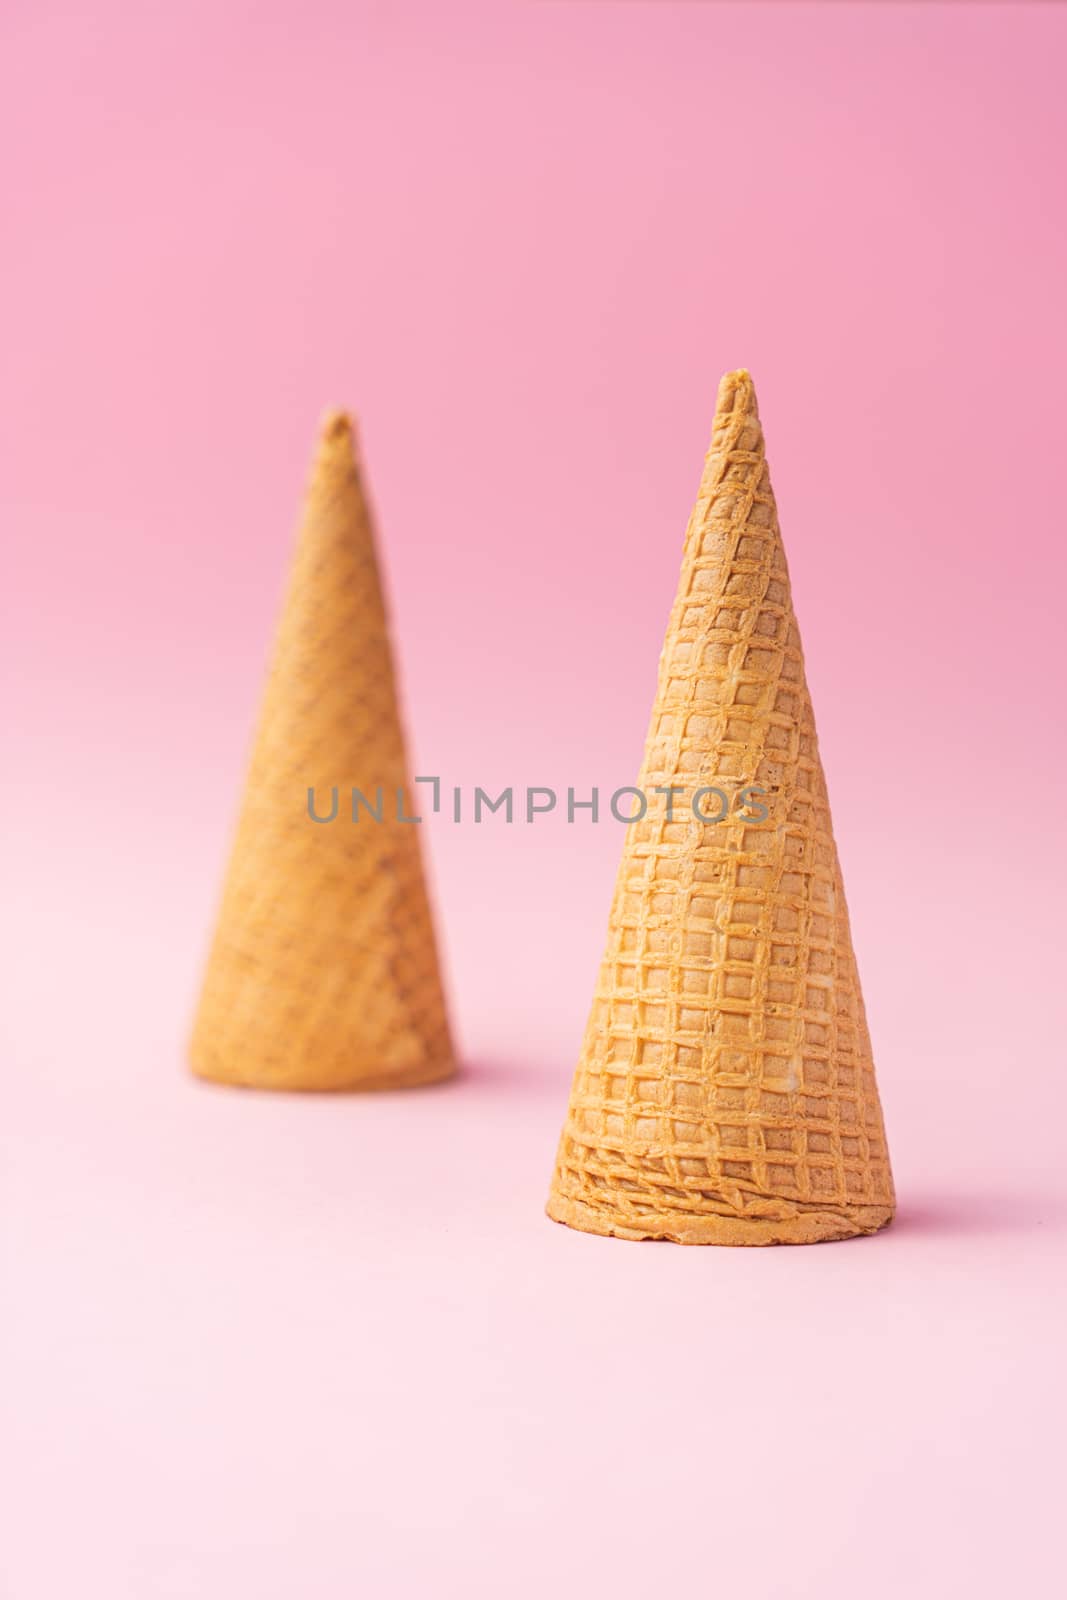 Two upside down wheat flour ice cream cones one in the foreground and the other in the background on a pink background. Summer concept.